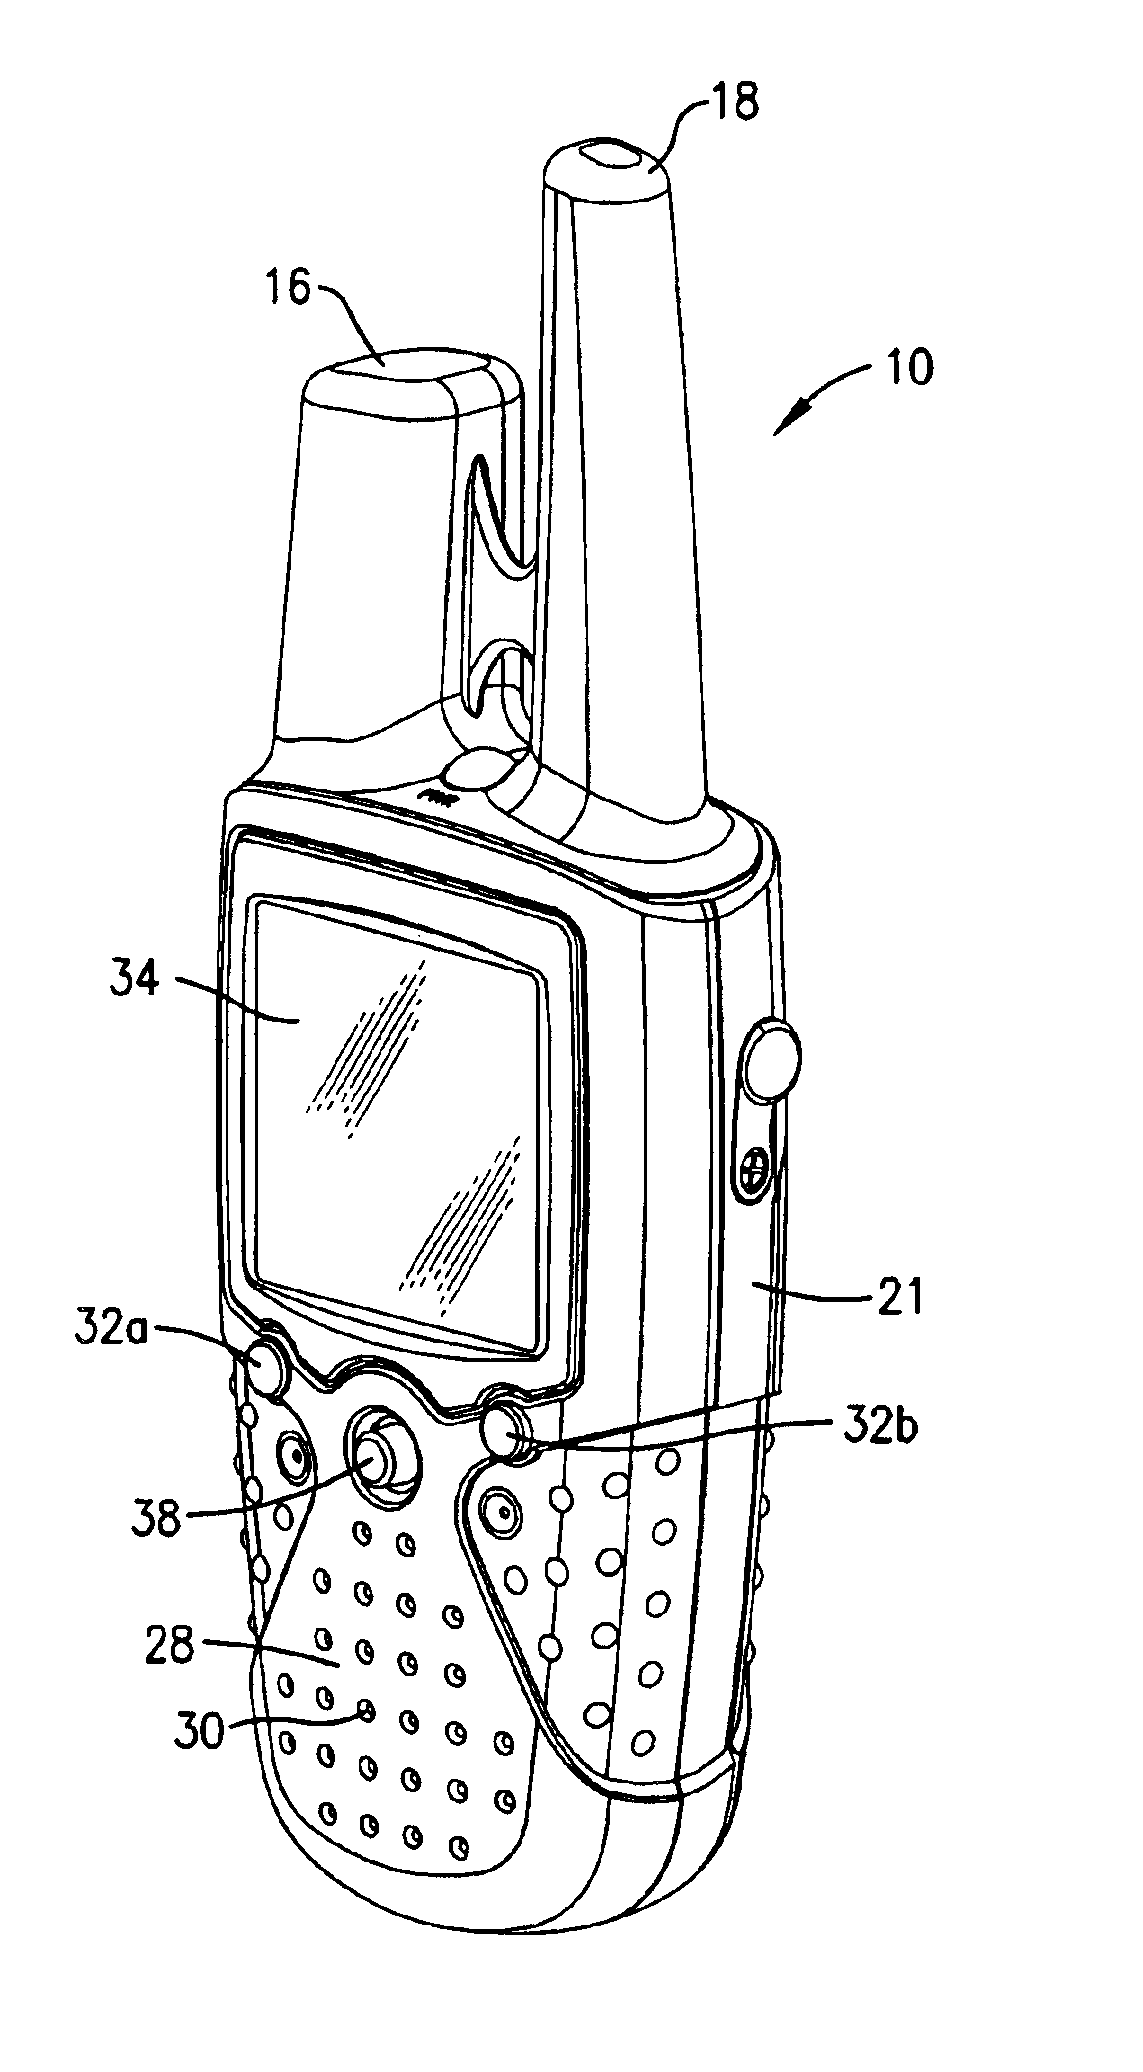 Combined global positioning system receiver and radio with enhanced tracking features